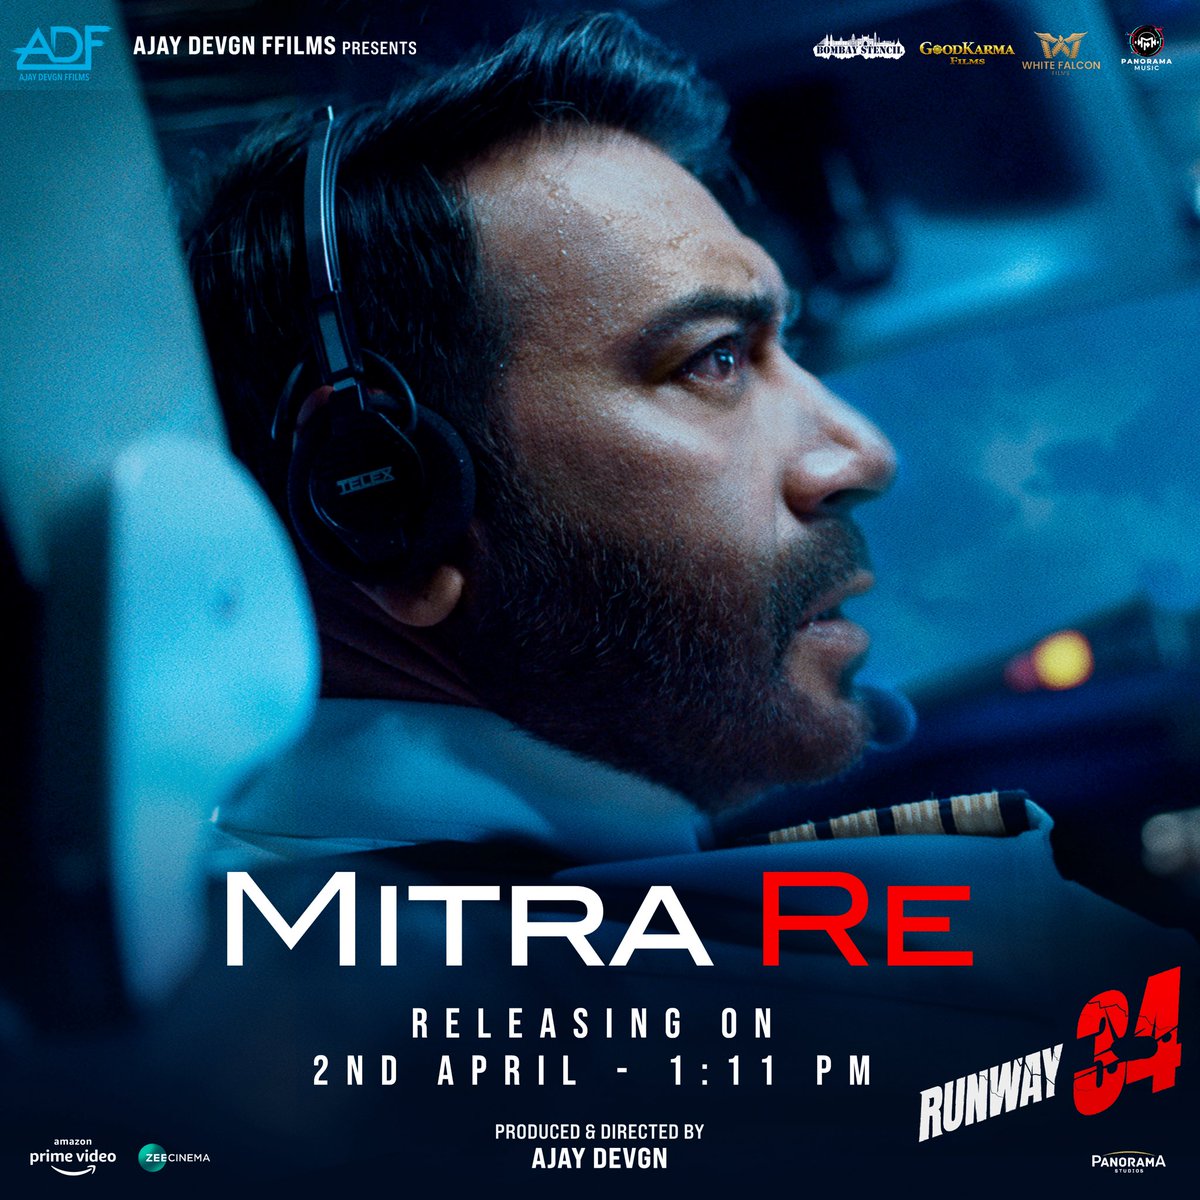 #MitraRe song from #Runway34 releasing today at 1:11 pm! 

The Deadly combo of #ArijitSingh & #AjayDevgn is coming together once again for another masterpiece after #DeshMere.